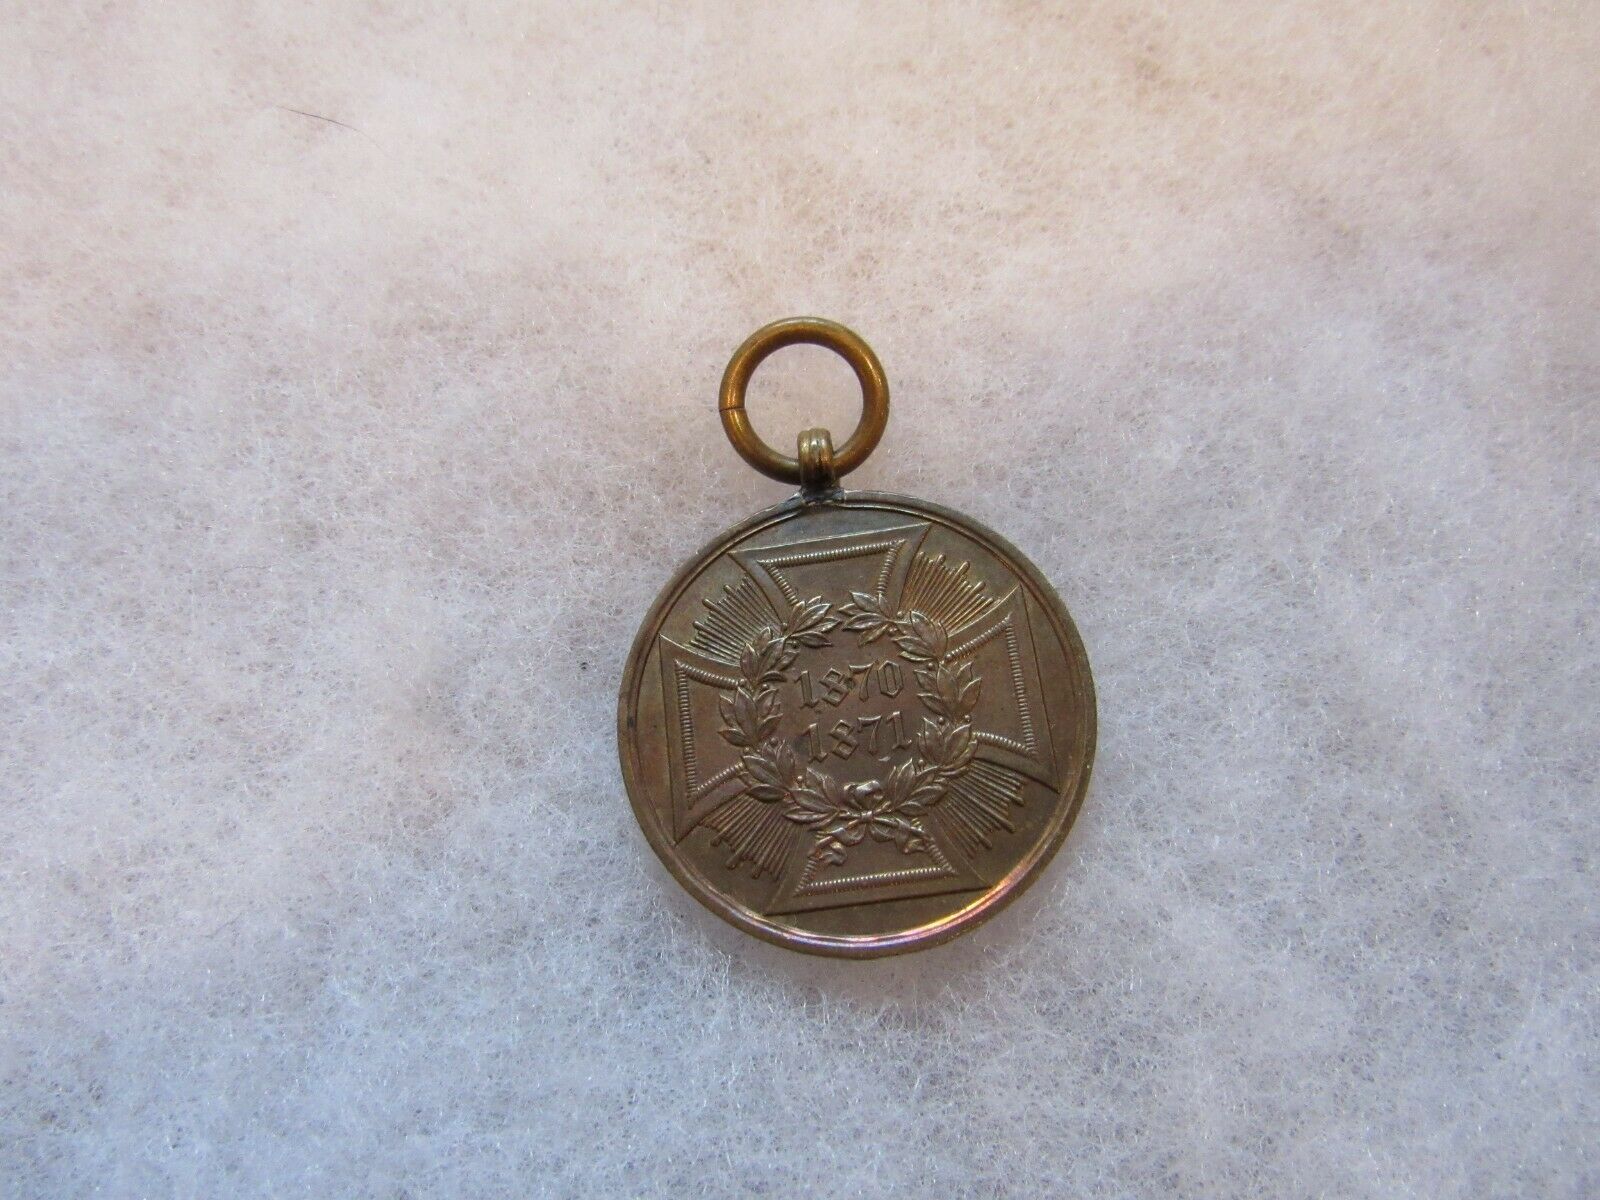 1870-1871 German Franco-Prussian War service medal planchet only ring marked